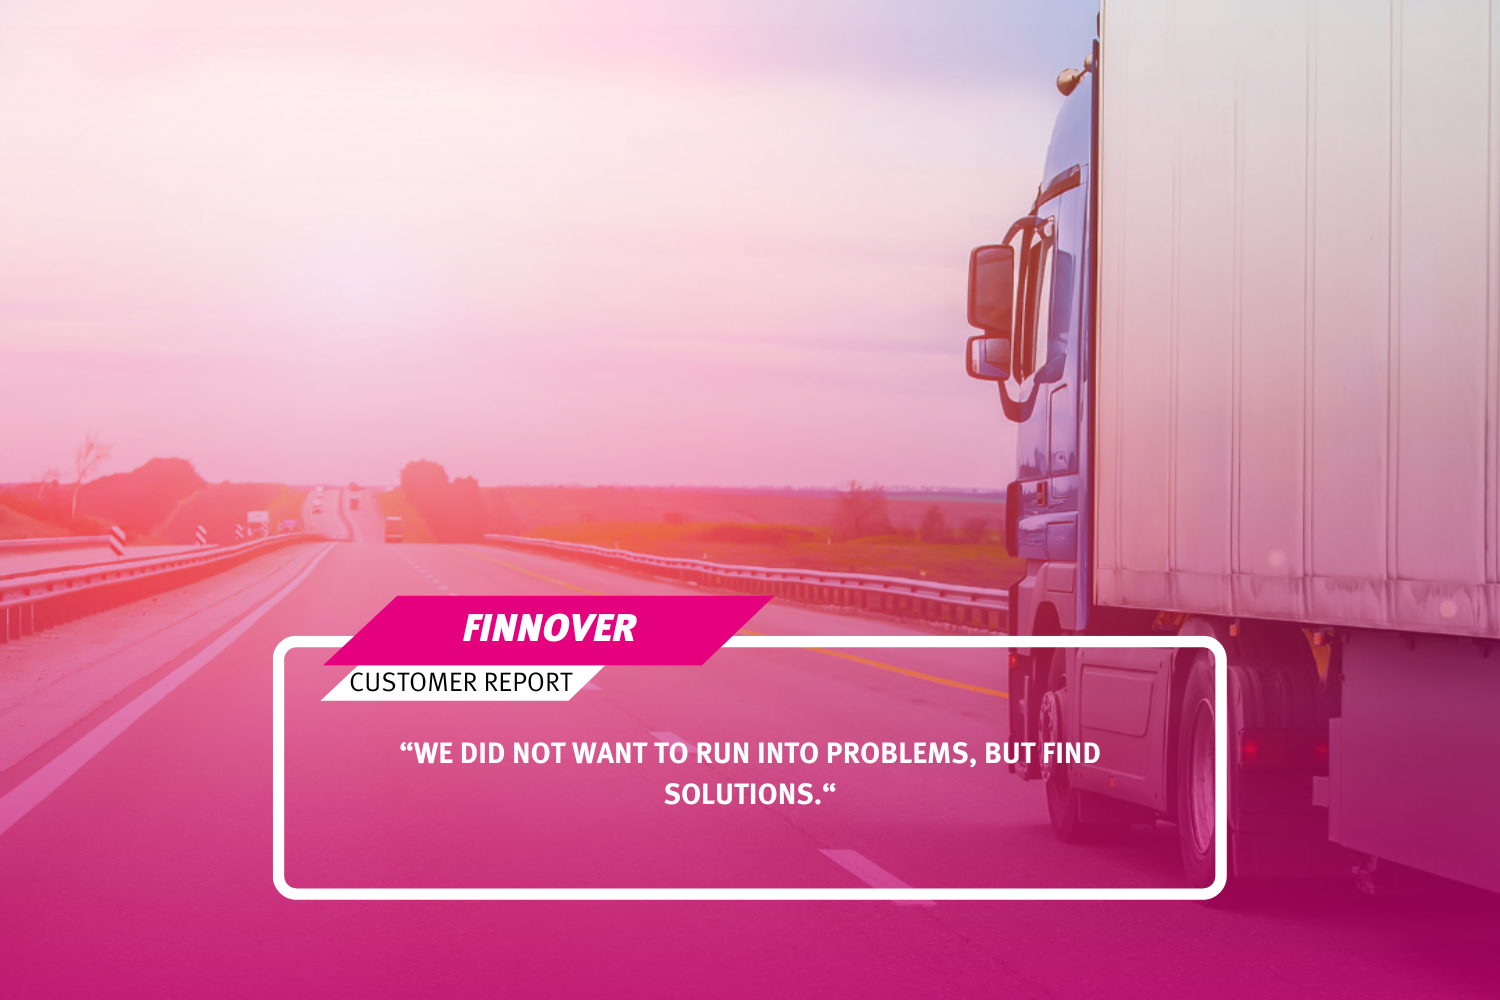 How Finnover uses CarLo to increase their efficiency in a relaxed manner